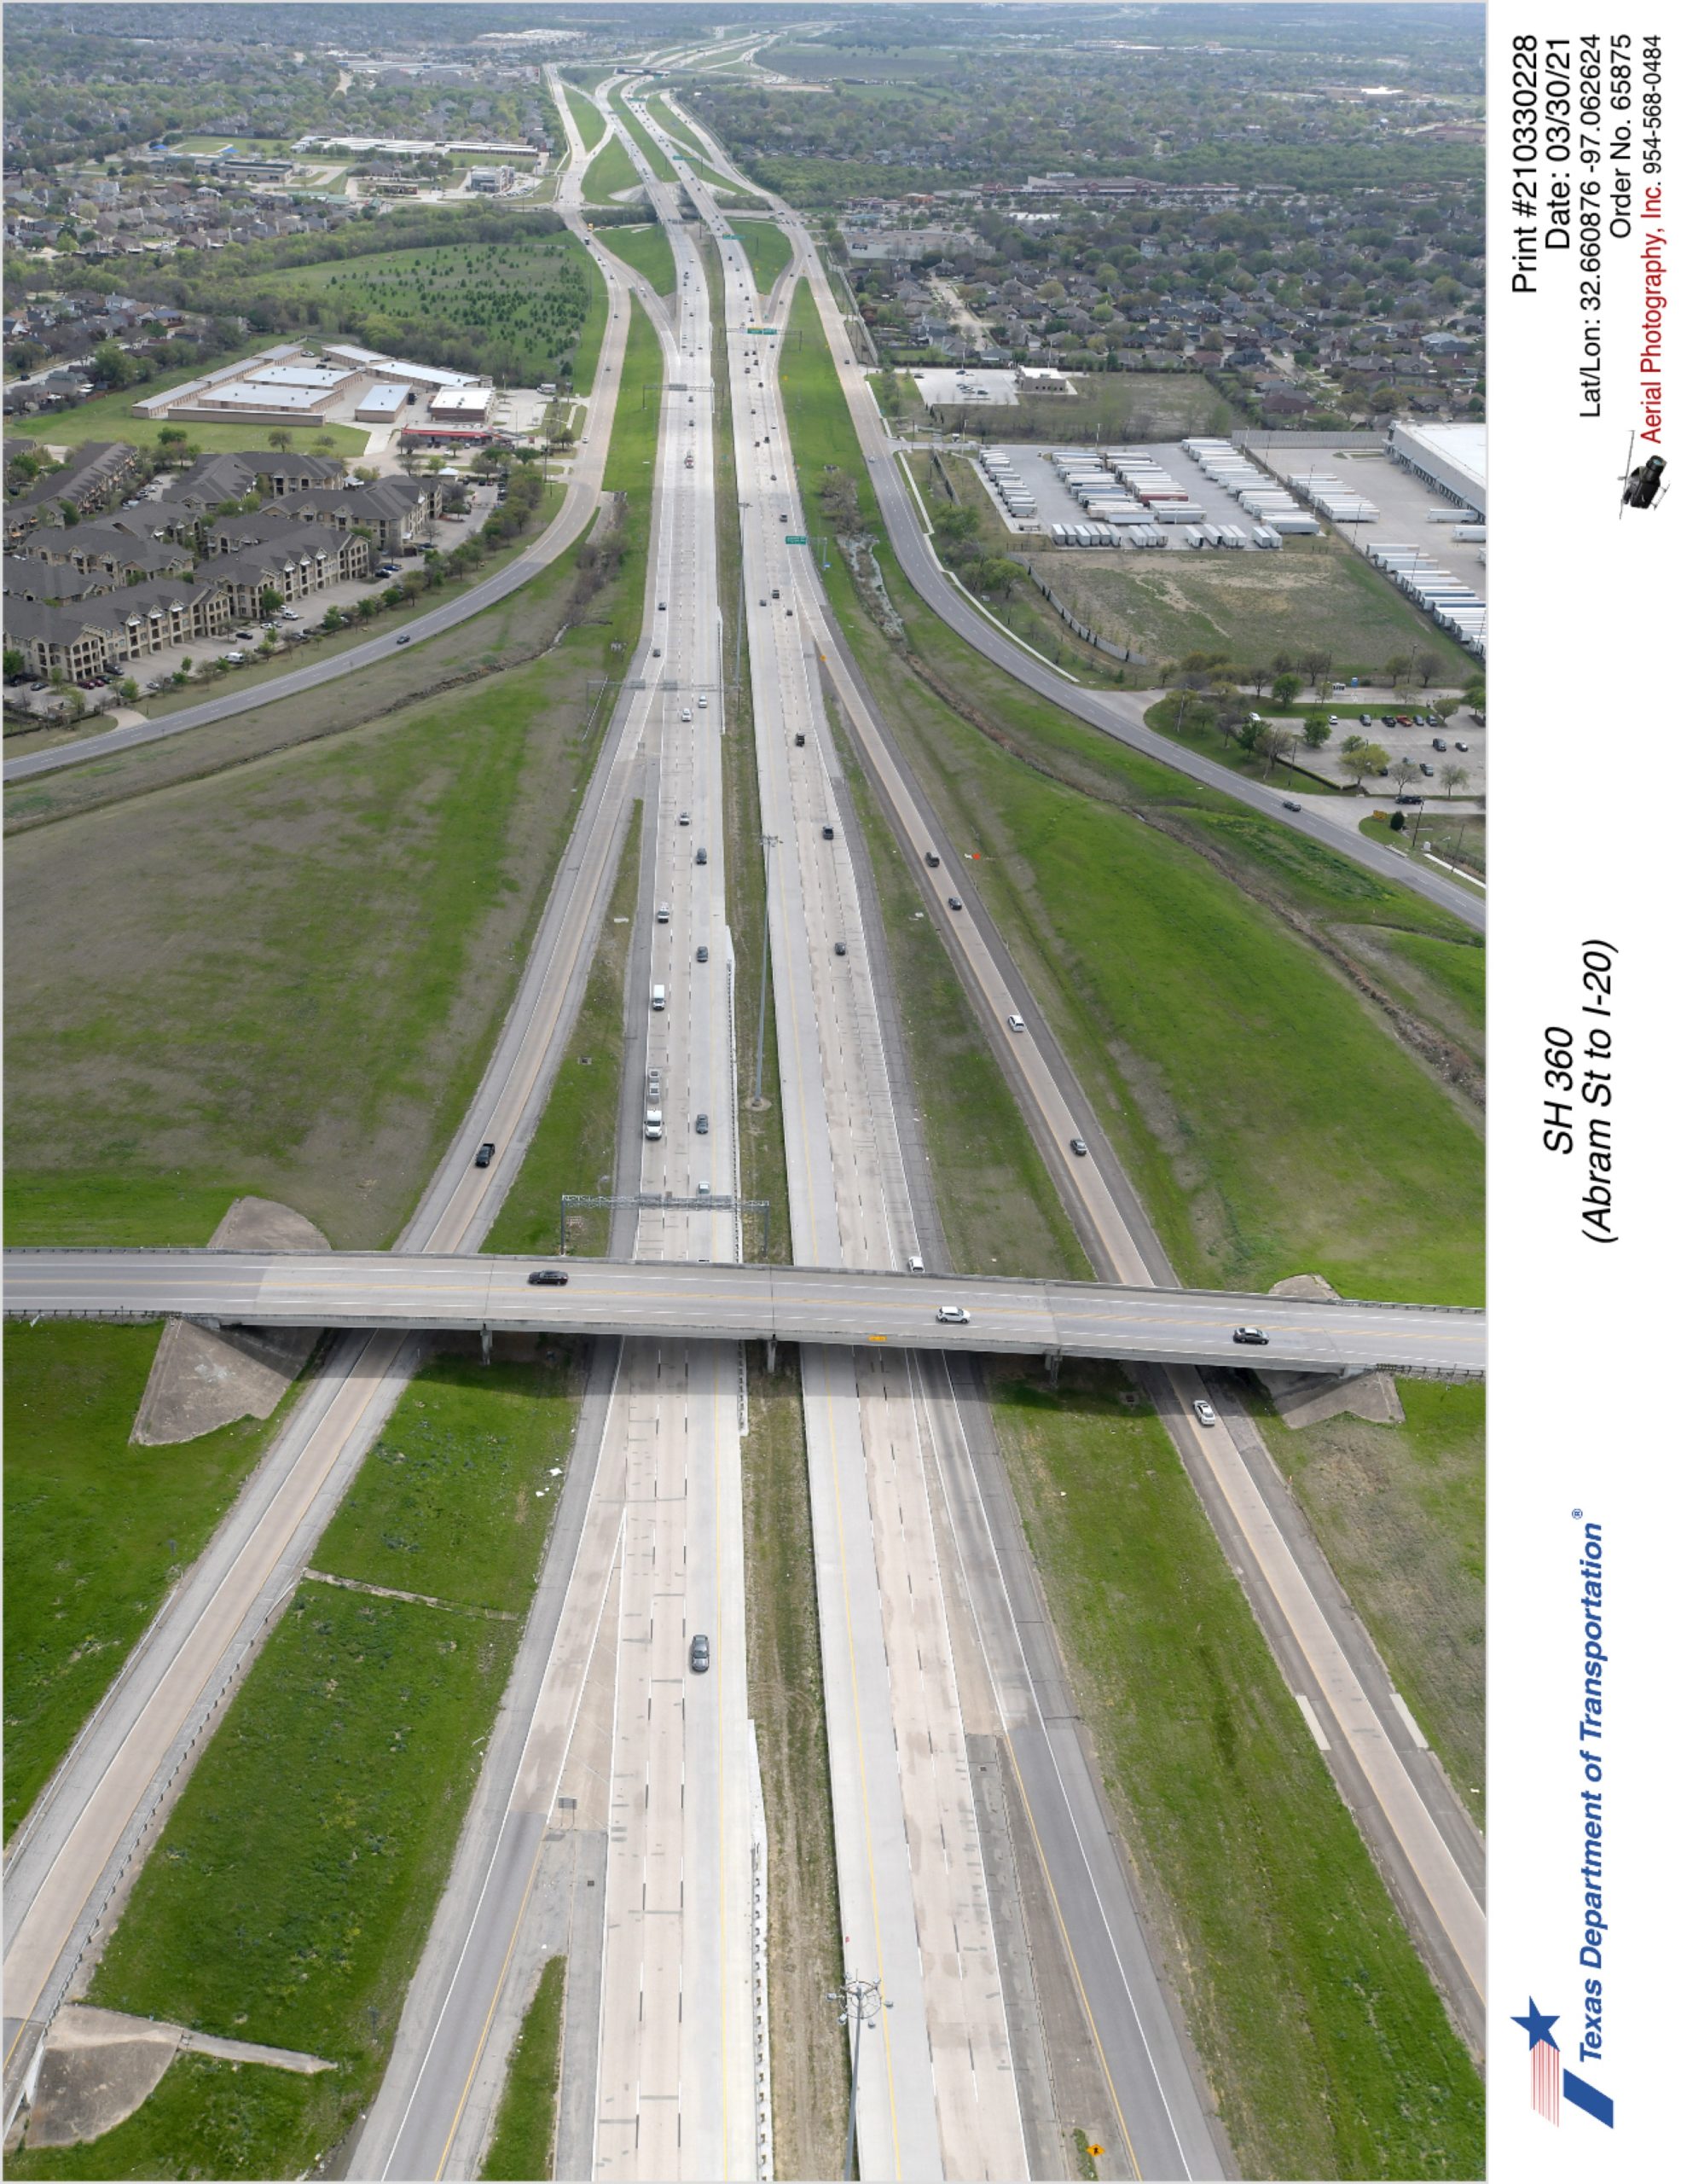 SH 360 looking south over I-20 interchange with Bardin Rd interchange in foreground. Completed interior lanes in use.